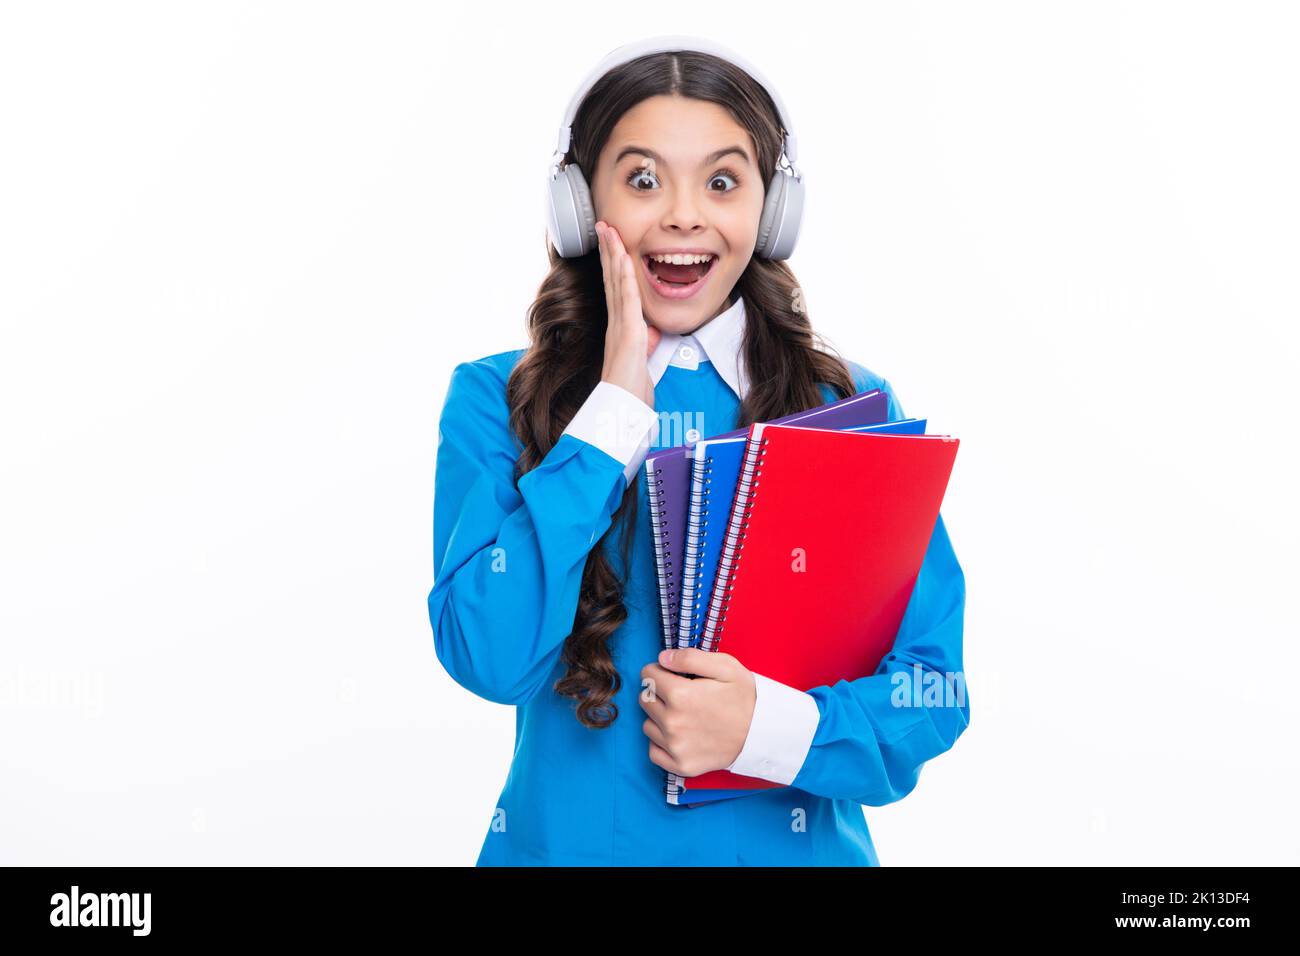 Excited face. School child girl with headphones and book isoalted on white background. Amazed expression, cheerful and glad. Stock Photo